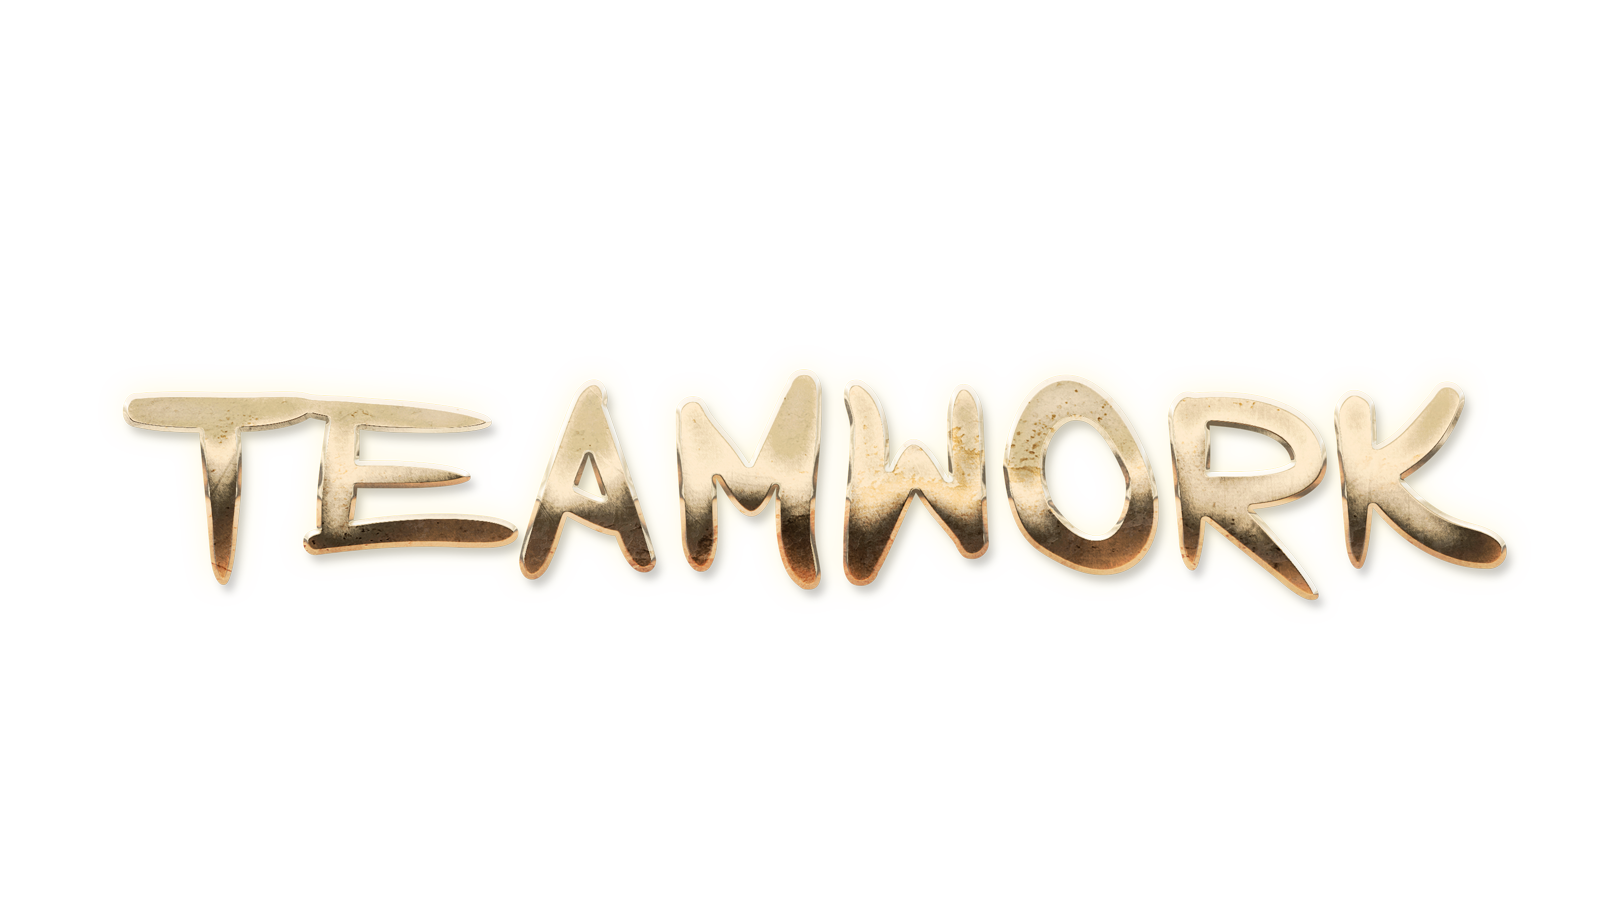 WORD TEAMWORK gold text effects art typography PNG images free